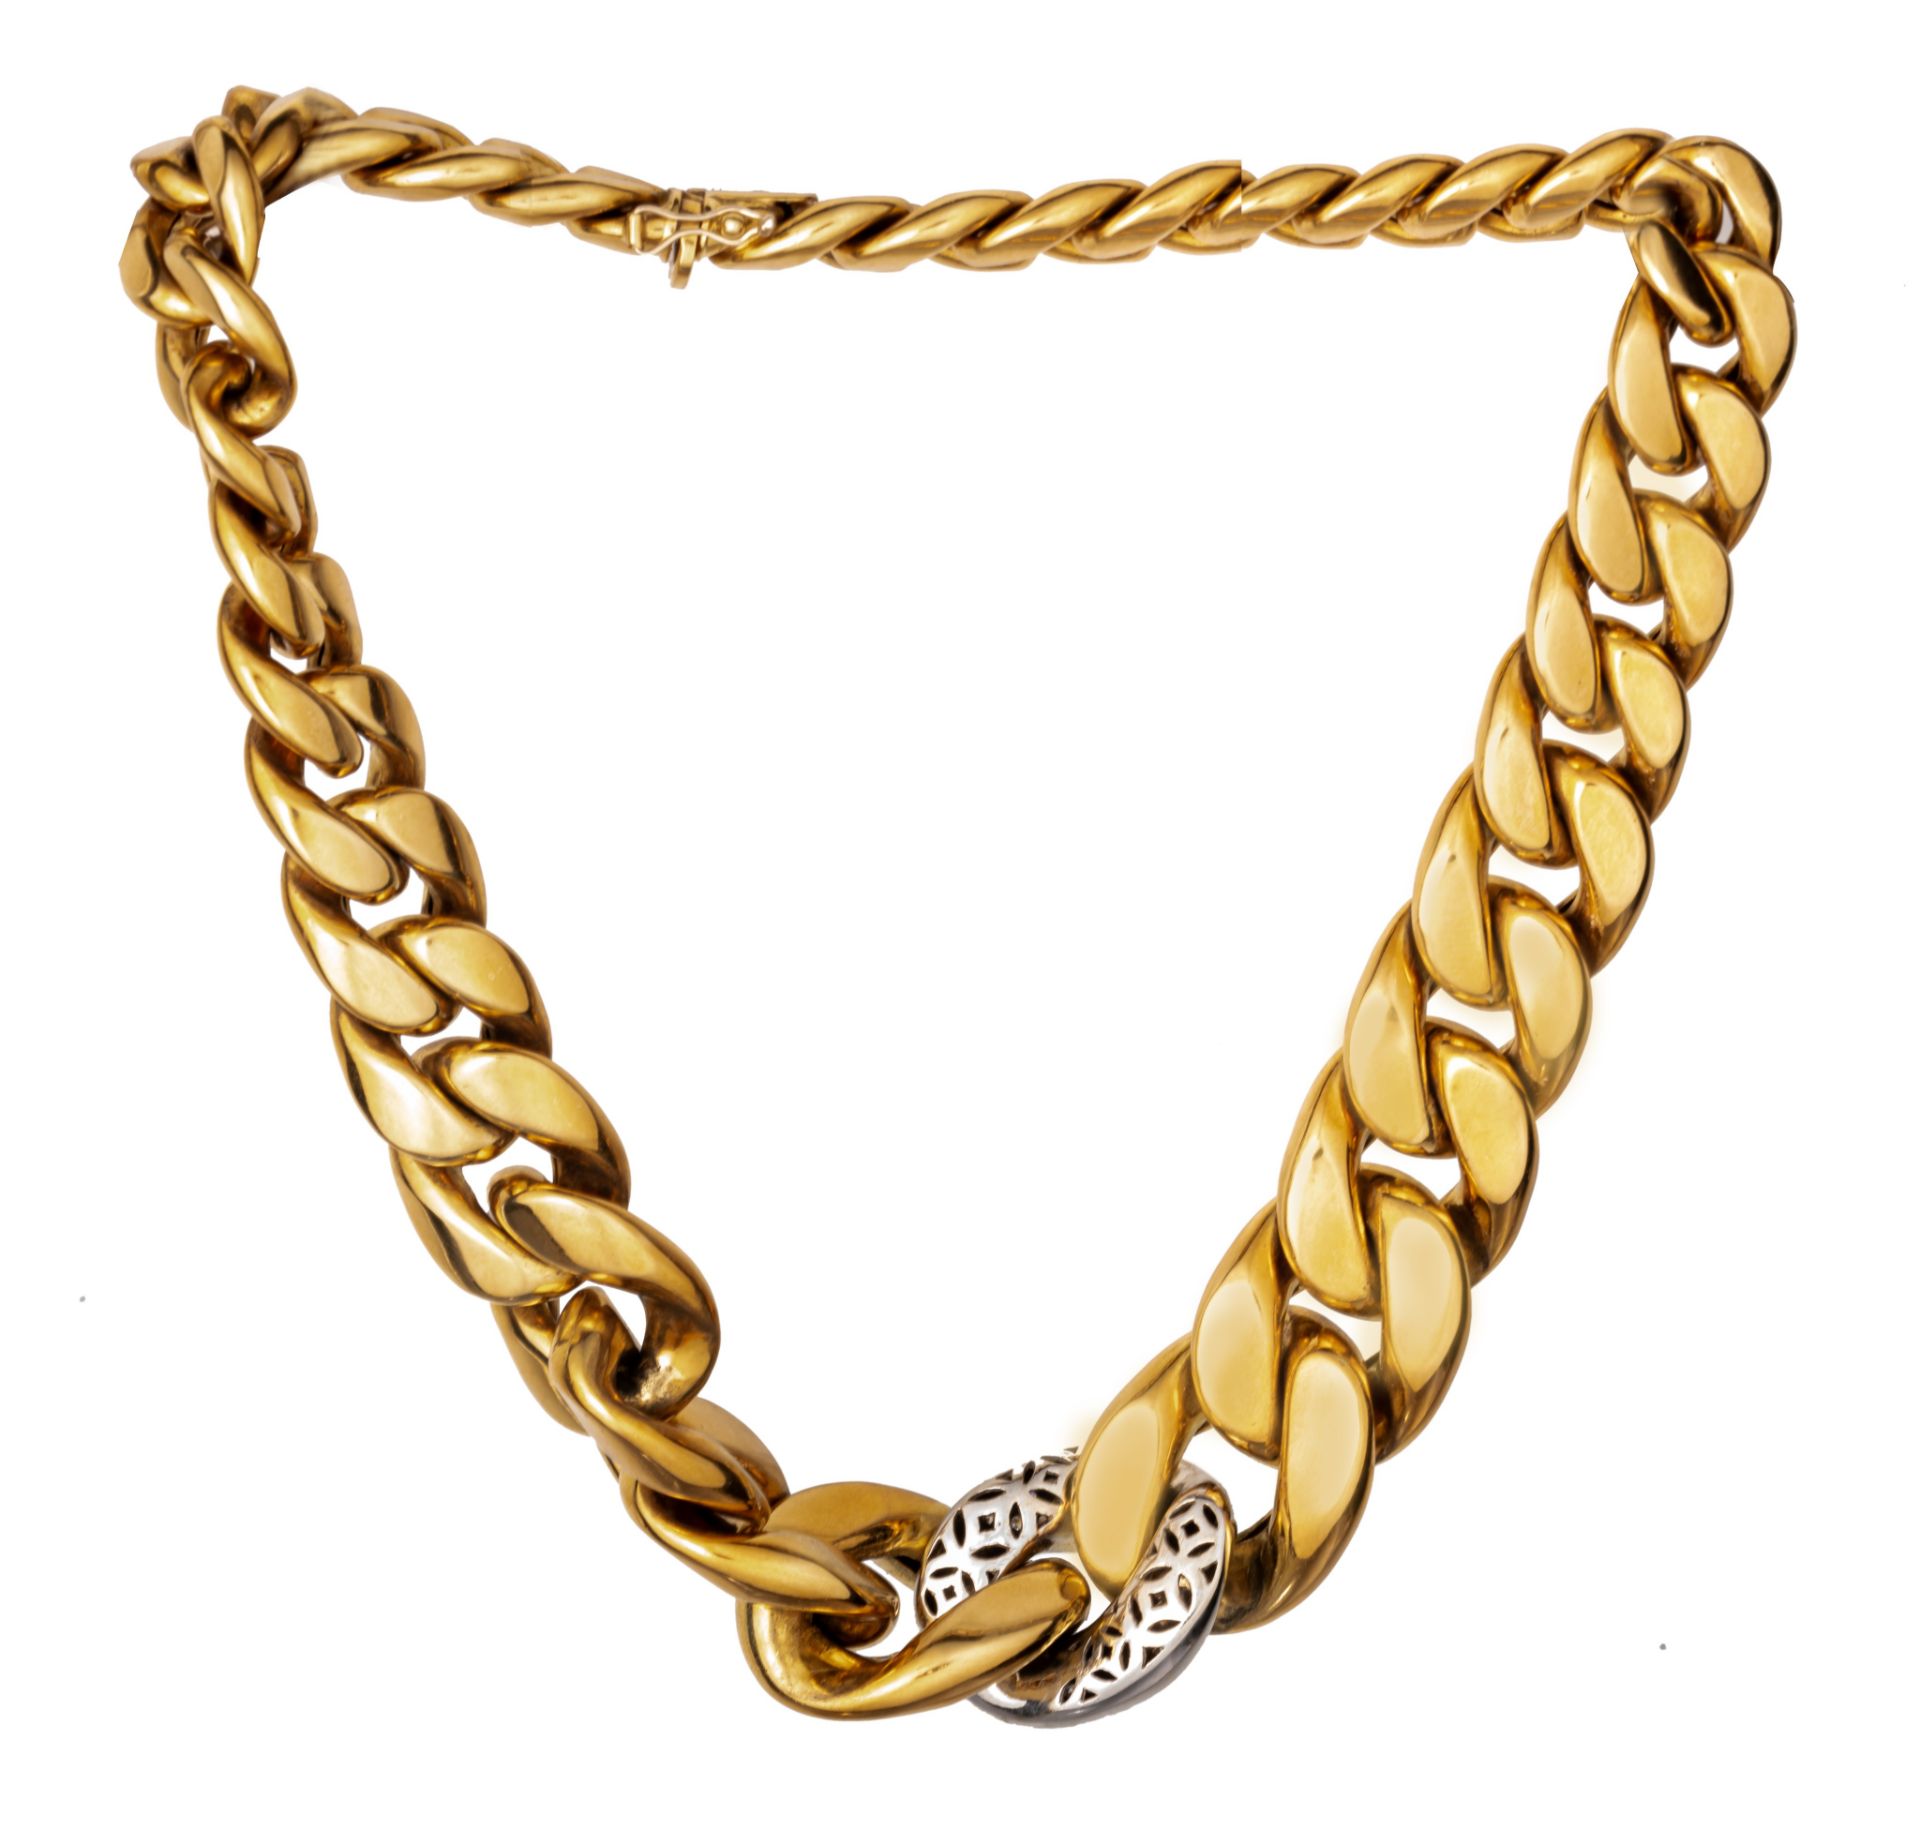 A braided necklace in 18ct yellow gold, set with brilliant-cut diamonds, 157 g - Image 2 of 4